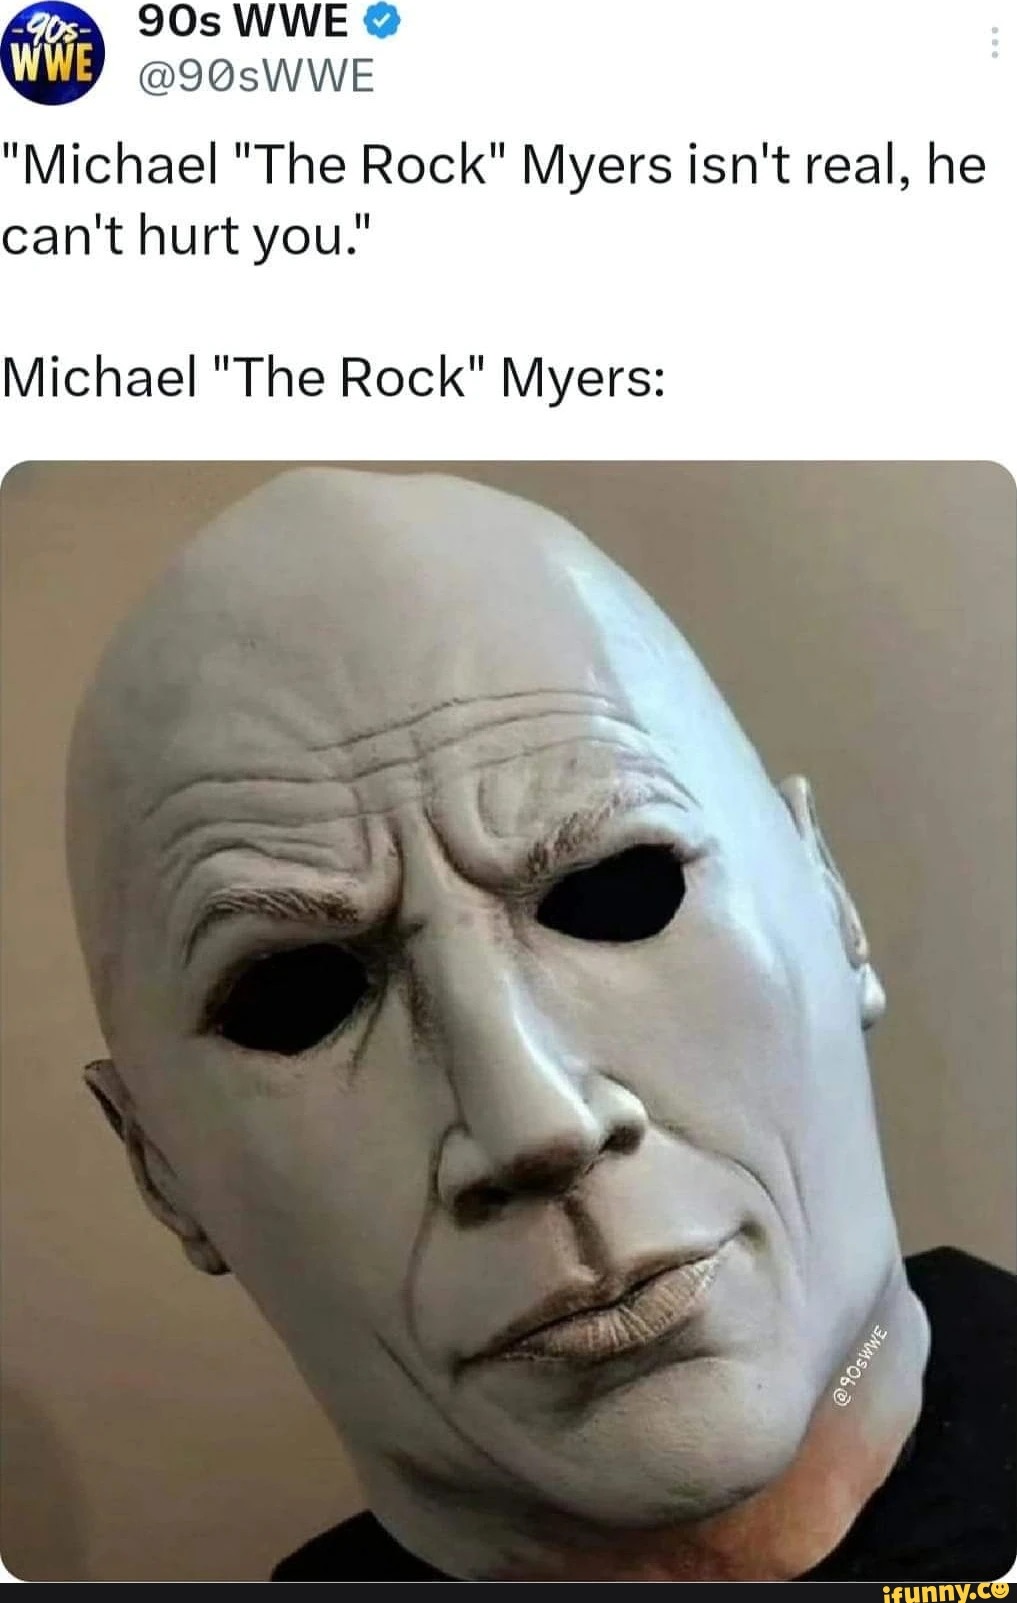 The Rock or Michael Myers - meme